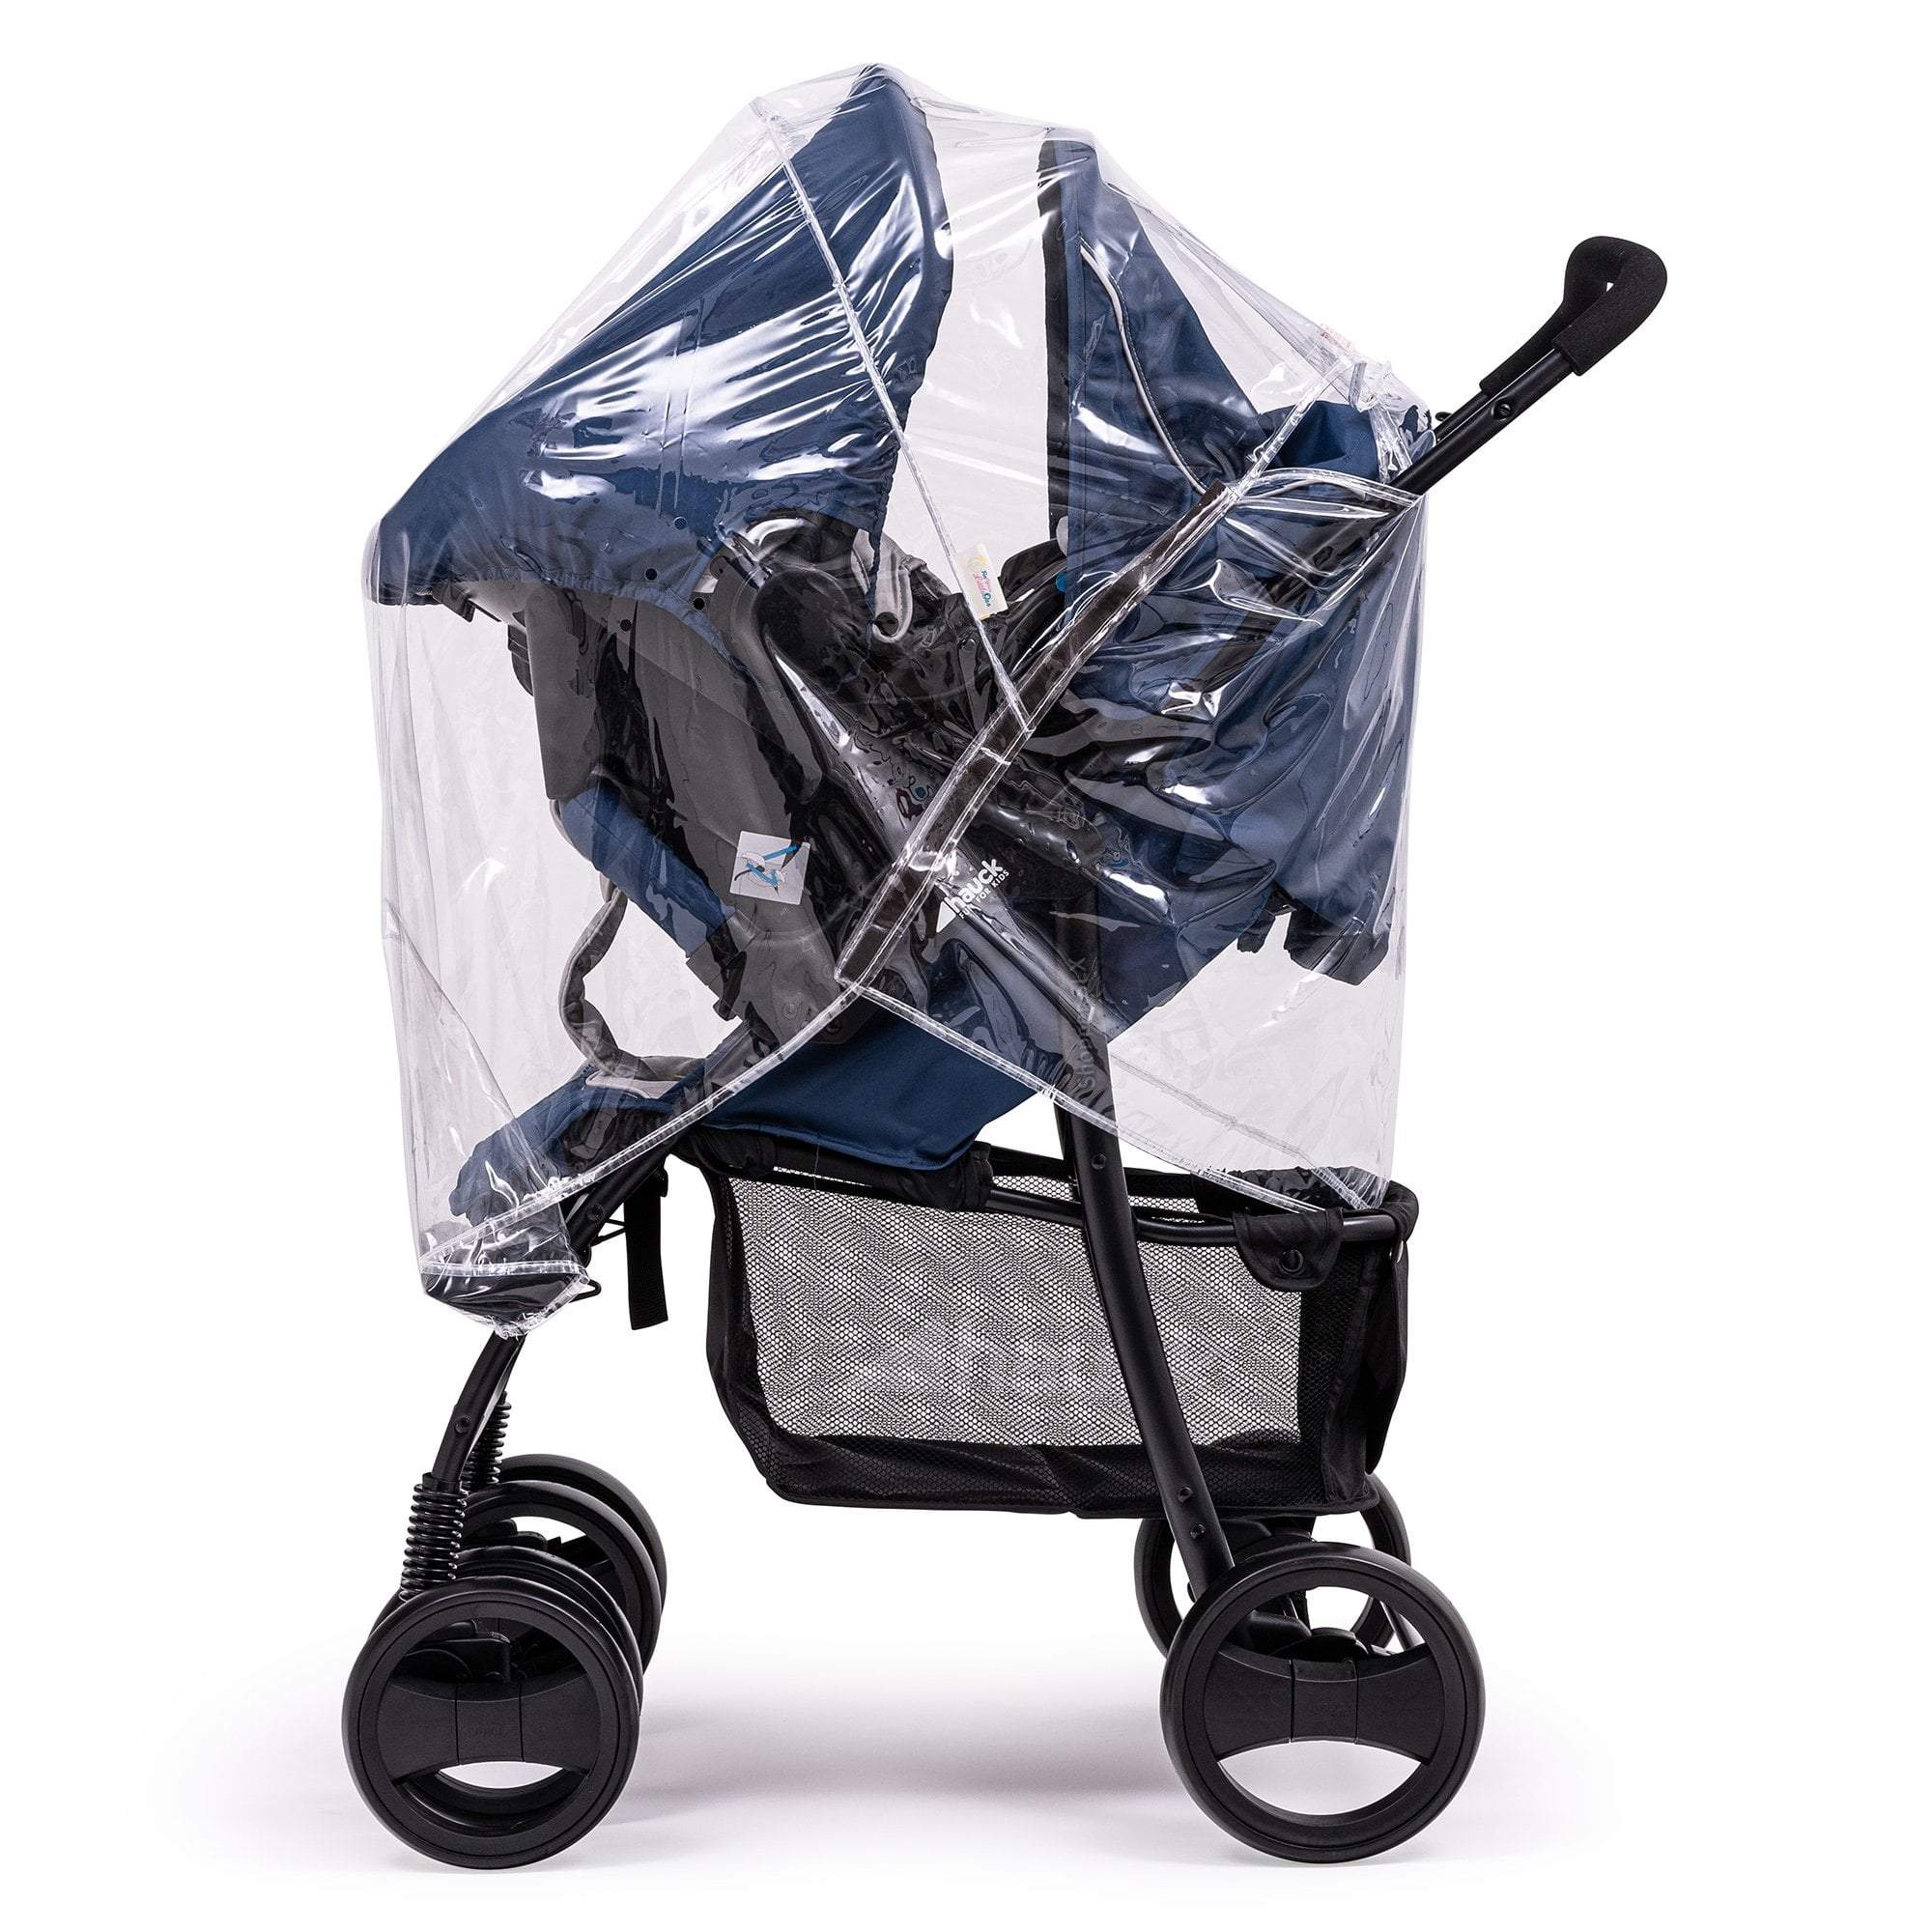 Travel System Raincover Compatible with Kiddicouture - Fits All Models - For Your Little One